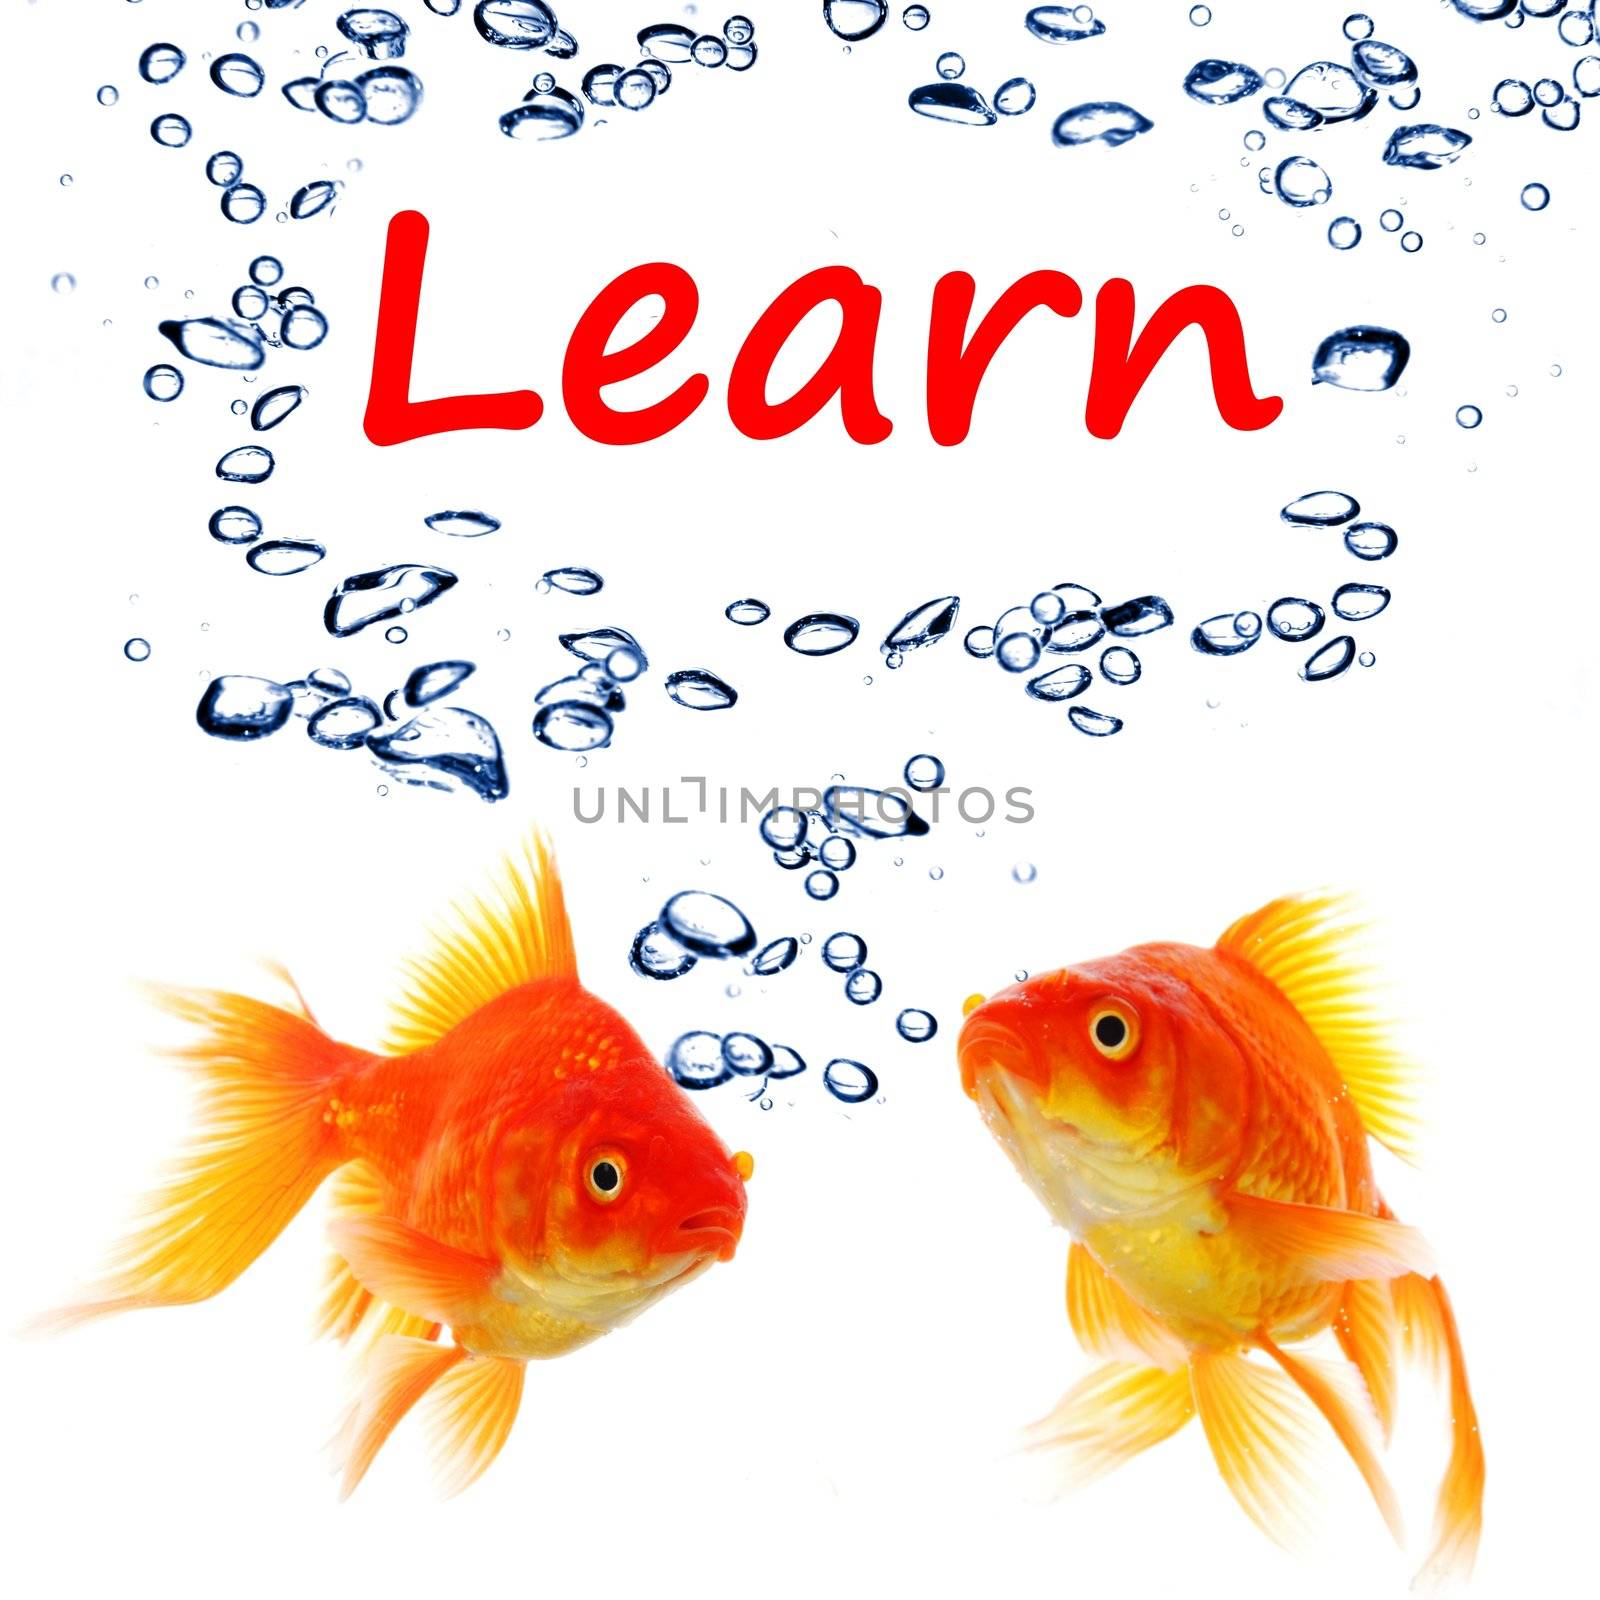 learn word with goldfish showing education concept in white background